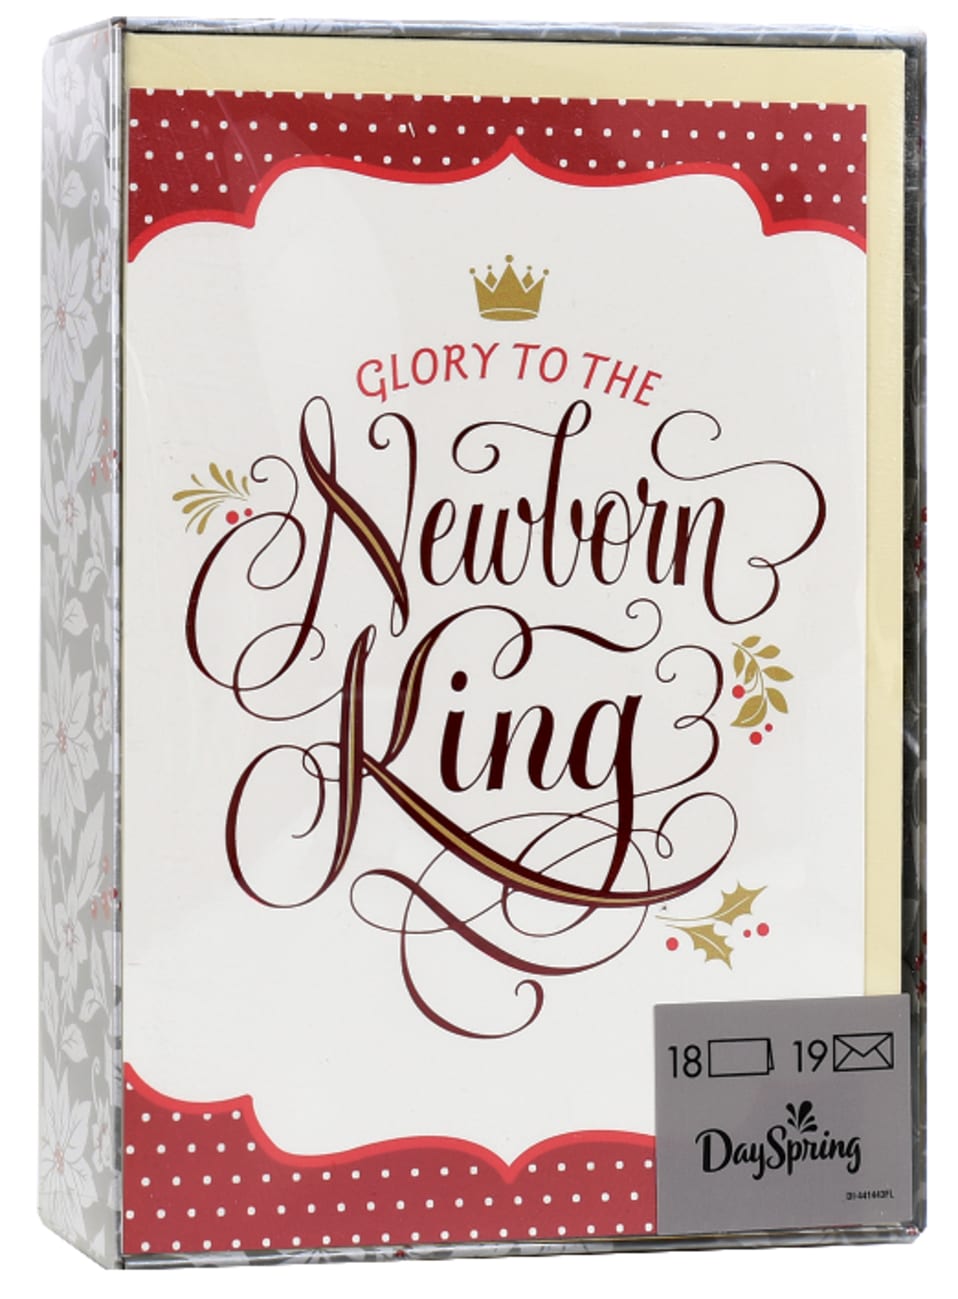 Christmas Boxed Cards: Glory to the Newborn King (Numbers 6:24 Niv) Box